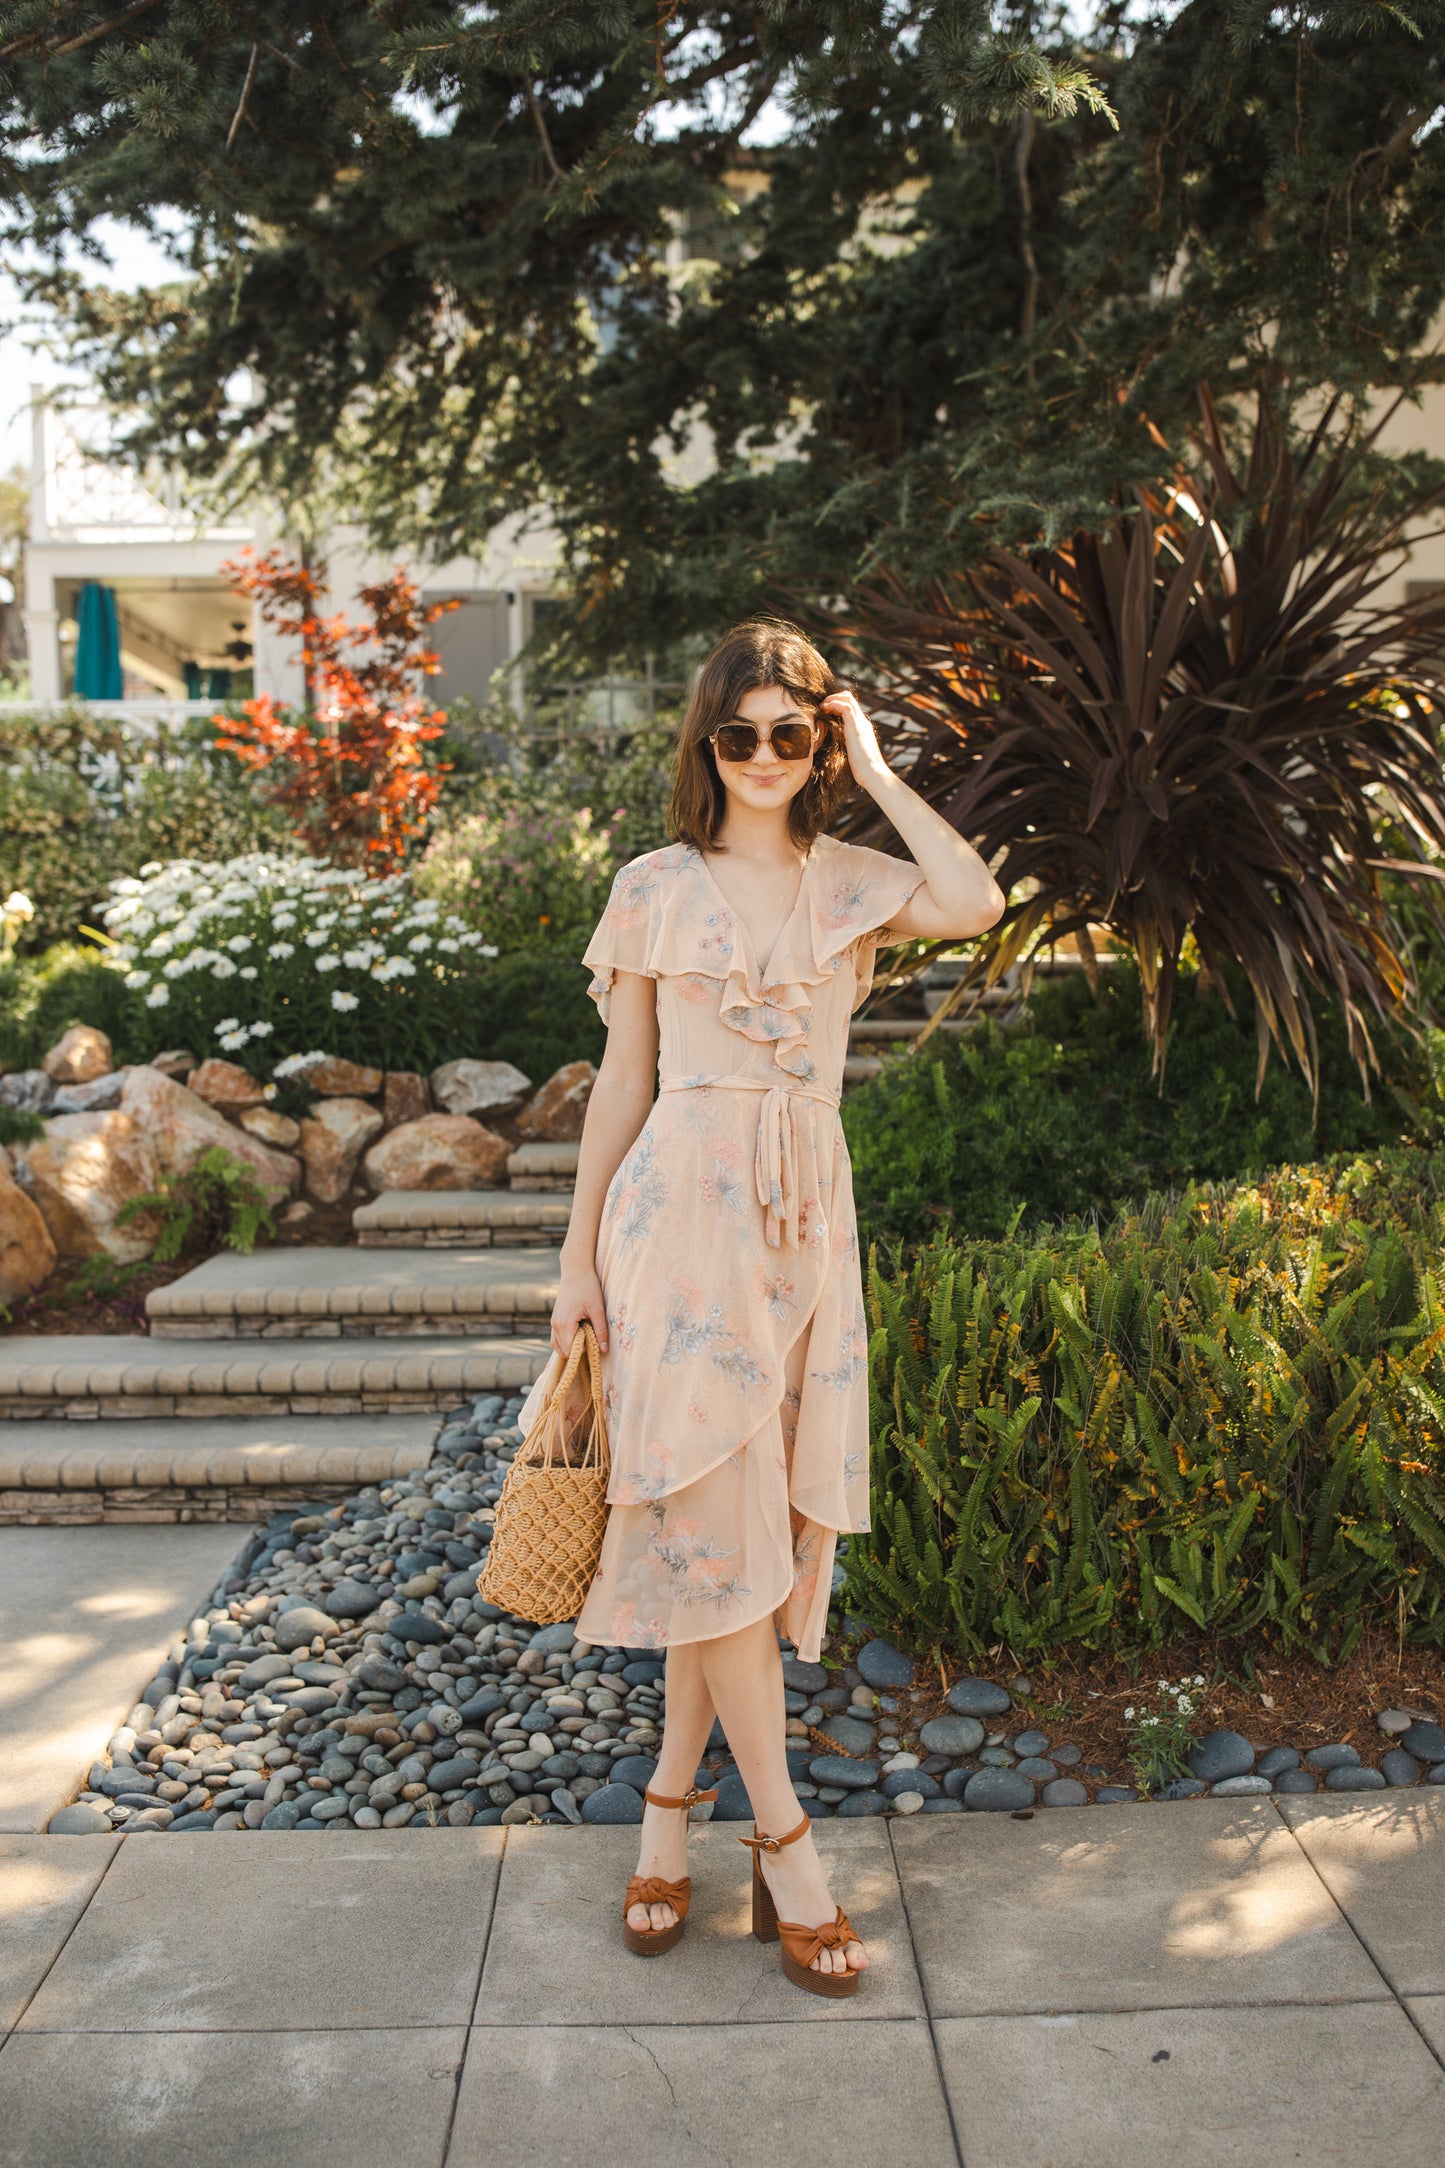 jennafer grace Fleur de Peche Flutter Wrap Dress light peach beige mesh with floral peach coral and gray embroidered flower print v-neck cinched waist midi dress boho bohemian hippie romantic whimsical handmade in California USA